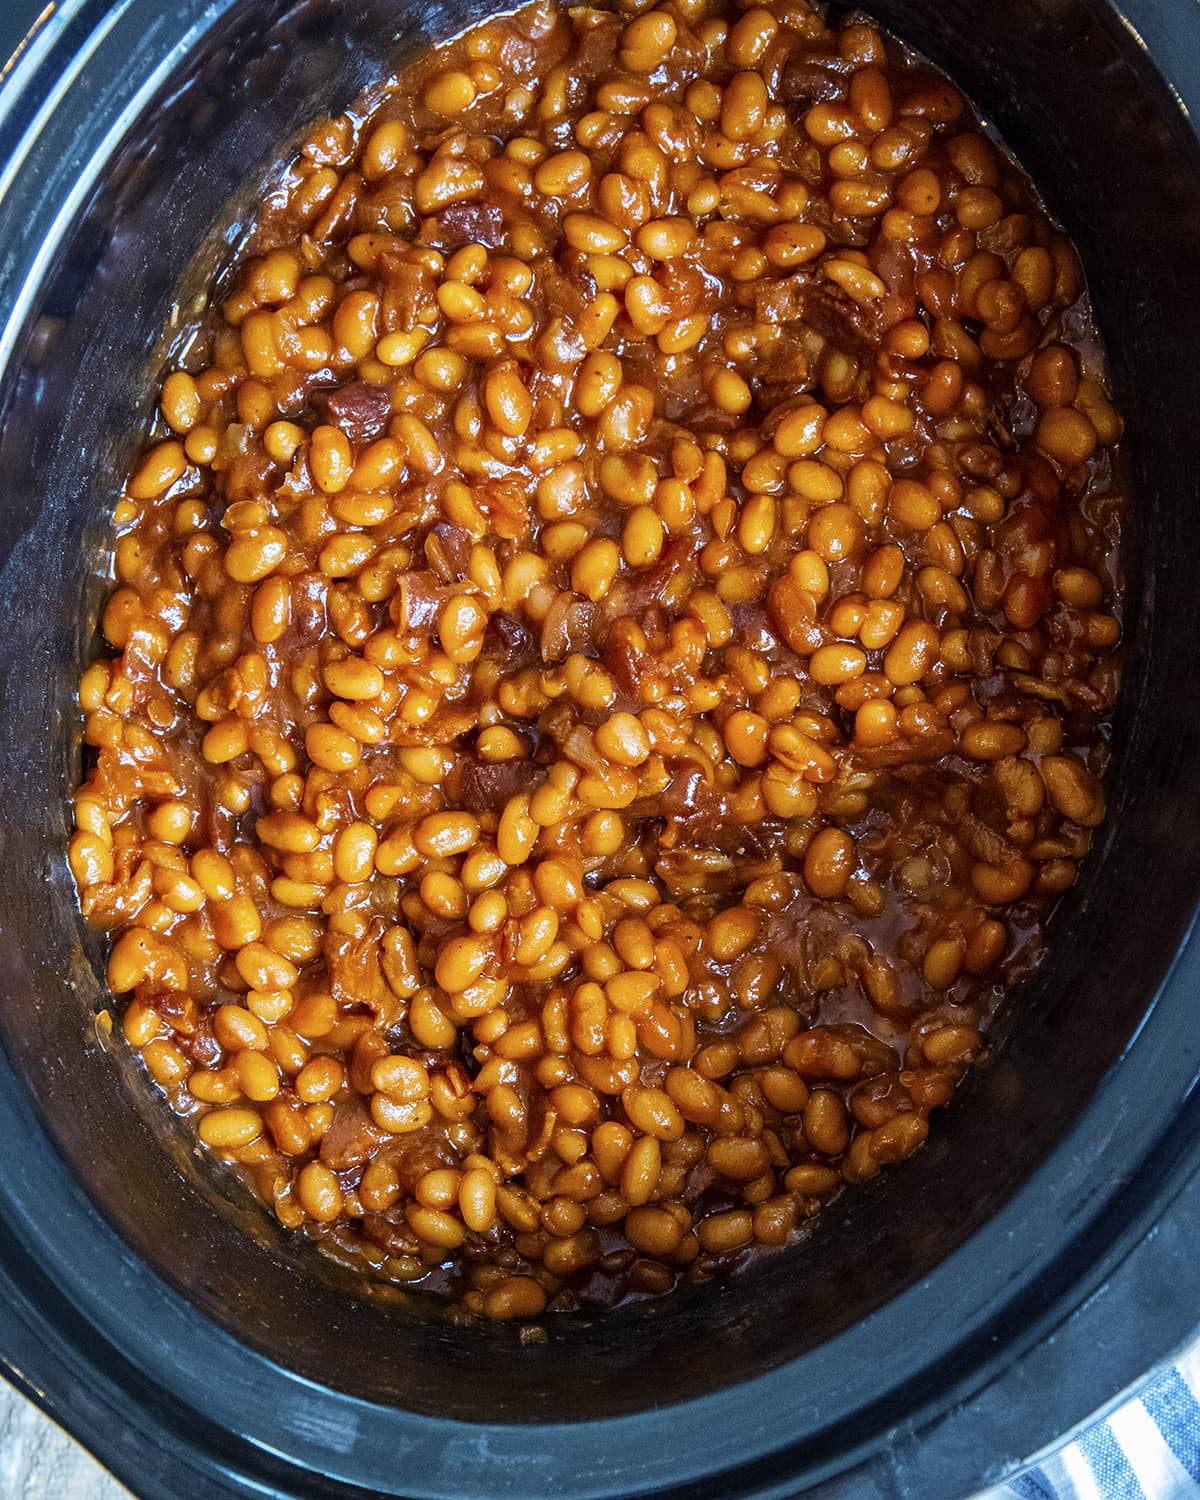 A slow cooker full of baked beans.